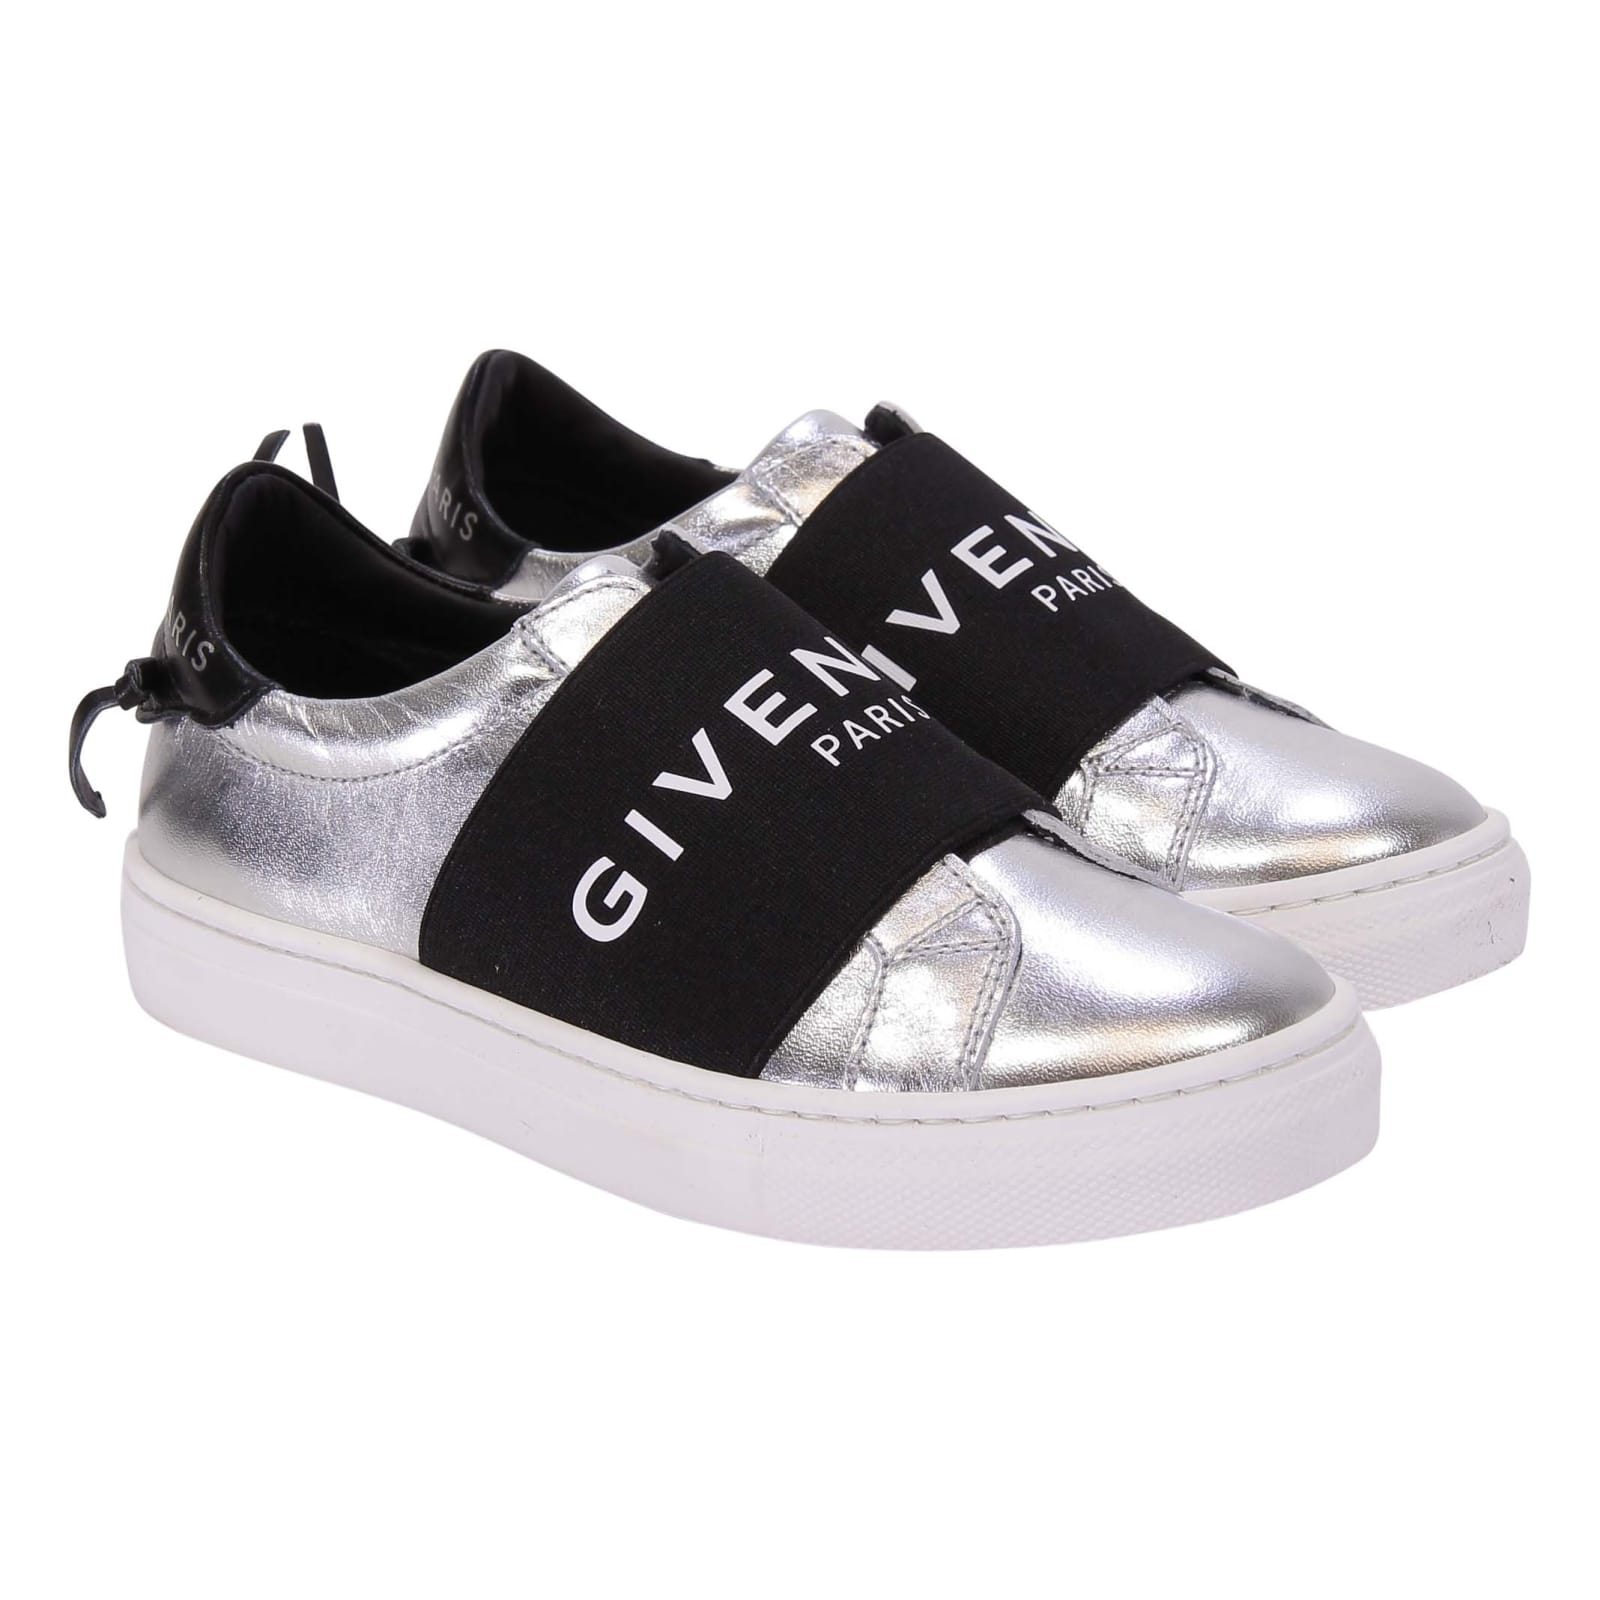 Image of Givenchy